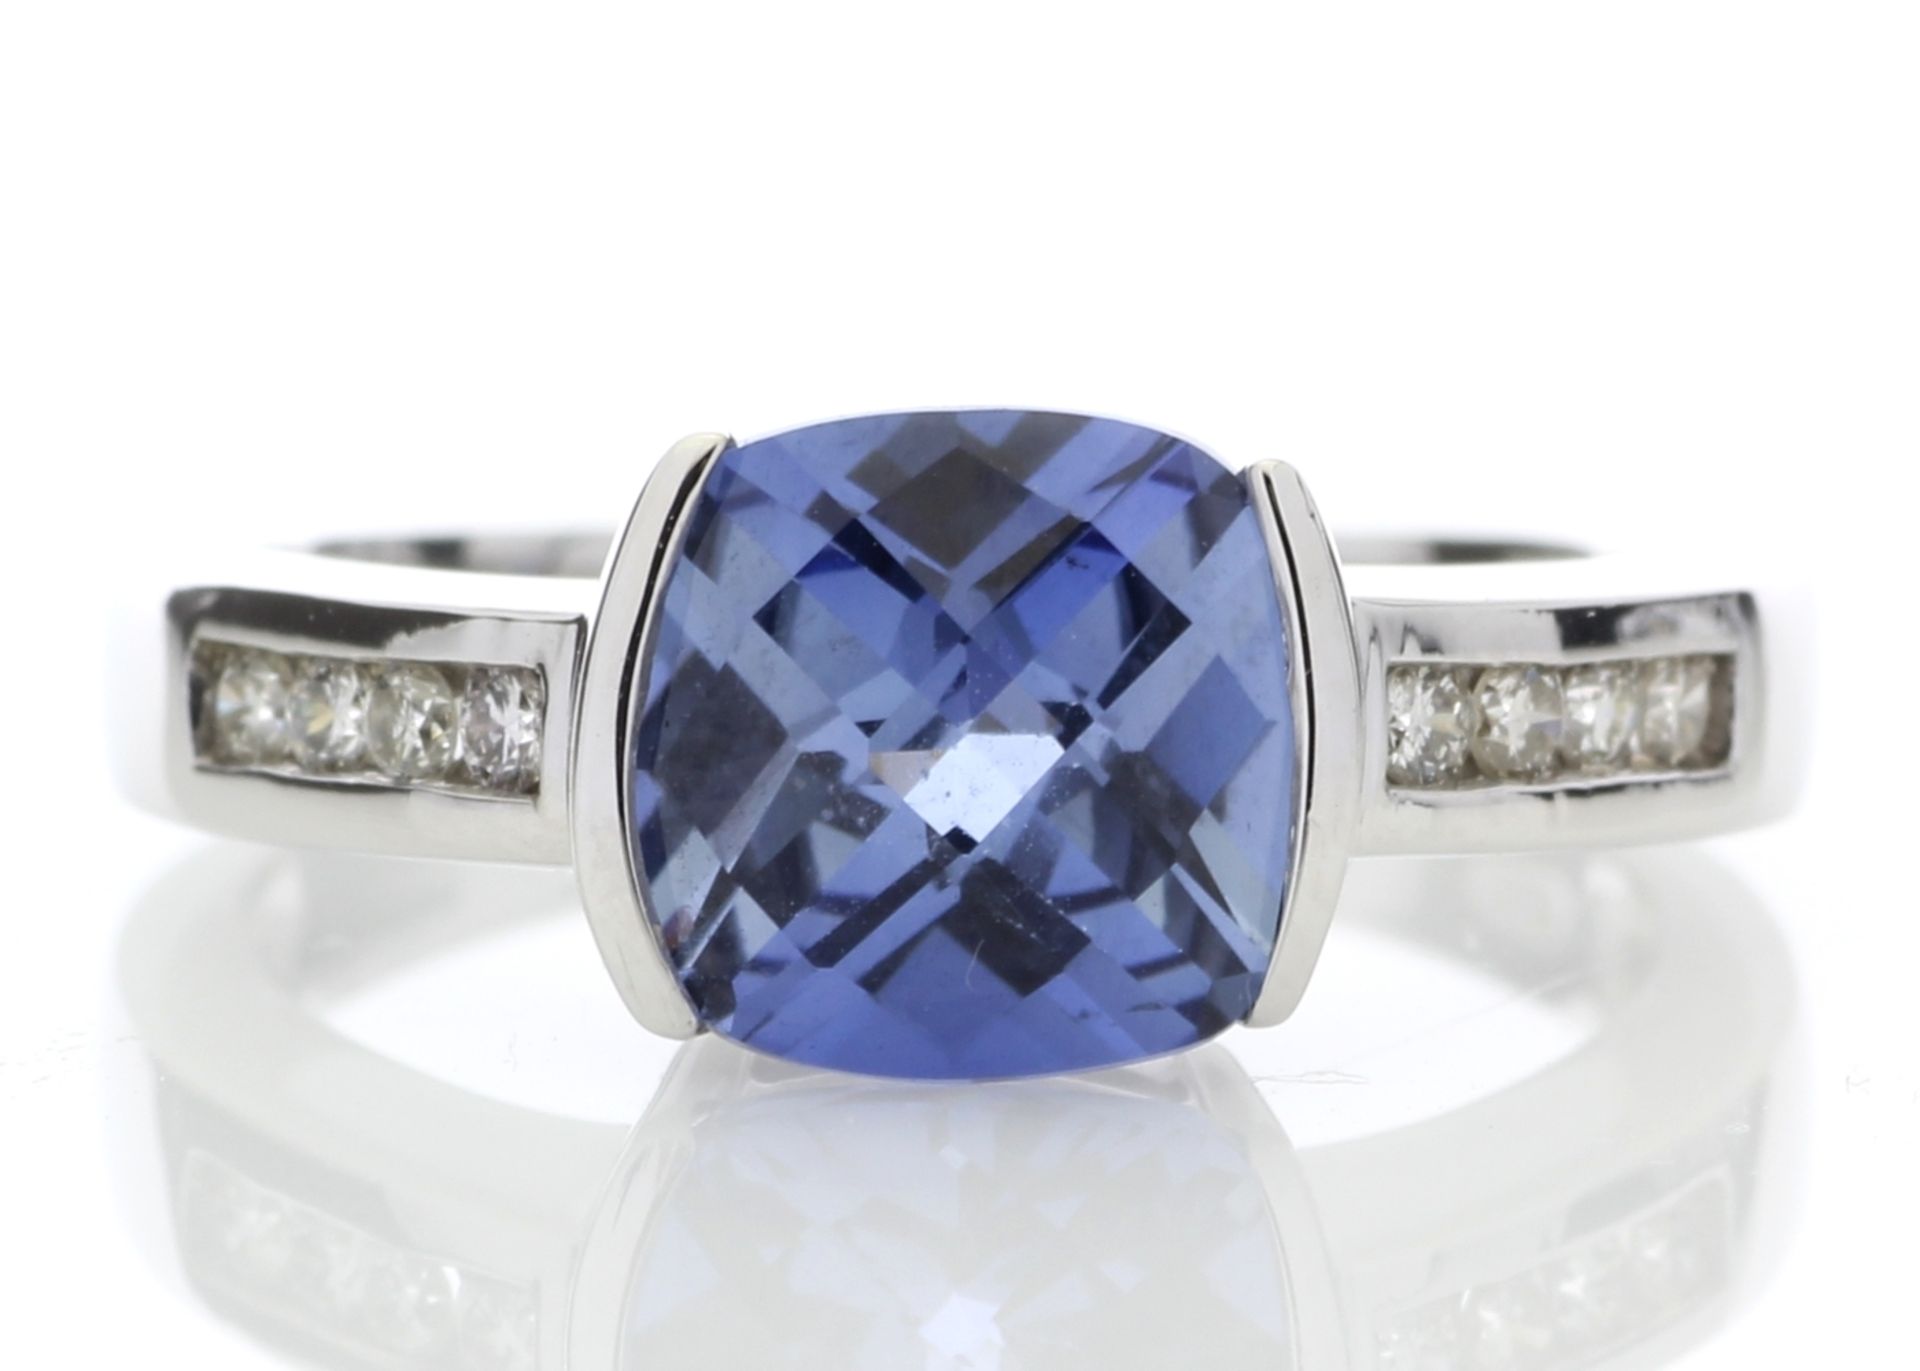 9ct White Gold Created Ceylon Sapphire Diamond Ring 0.11 Carats - Valued by AGI £695.00 - This